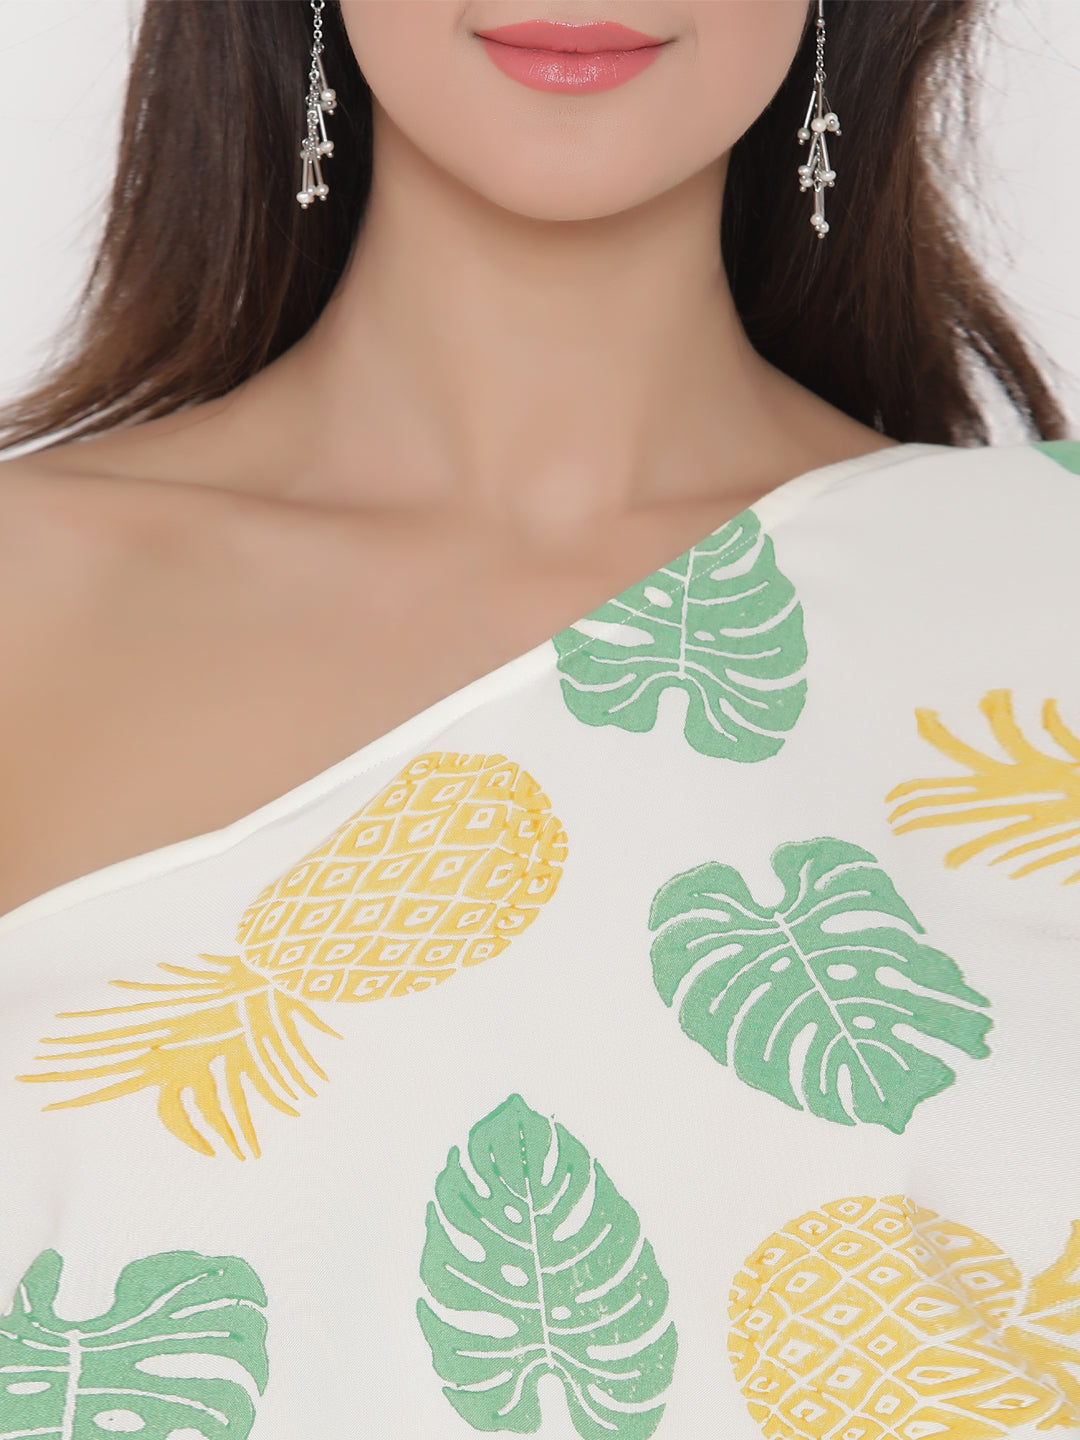 One shoulder Tropical Printed Dress with blouson waist